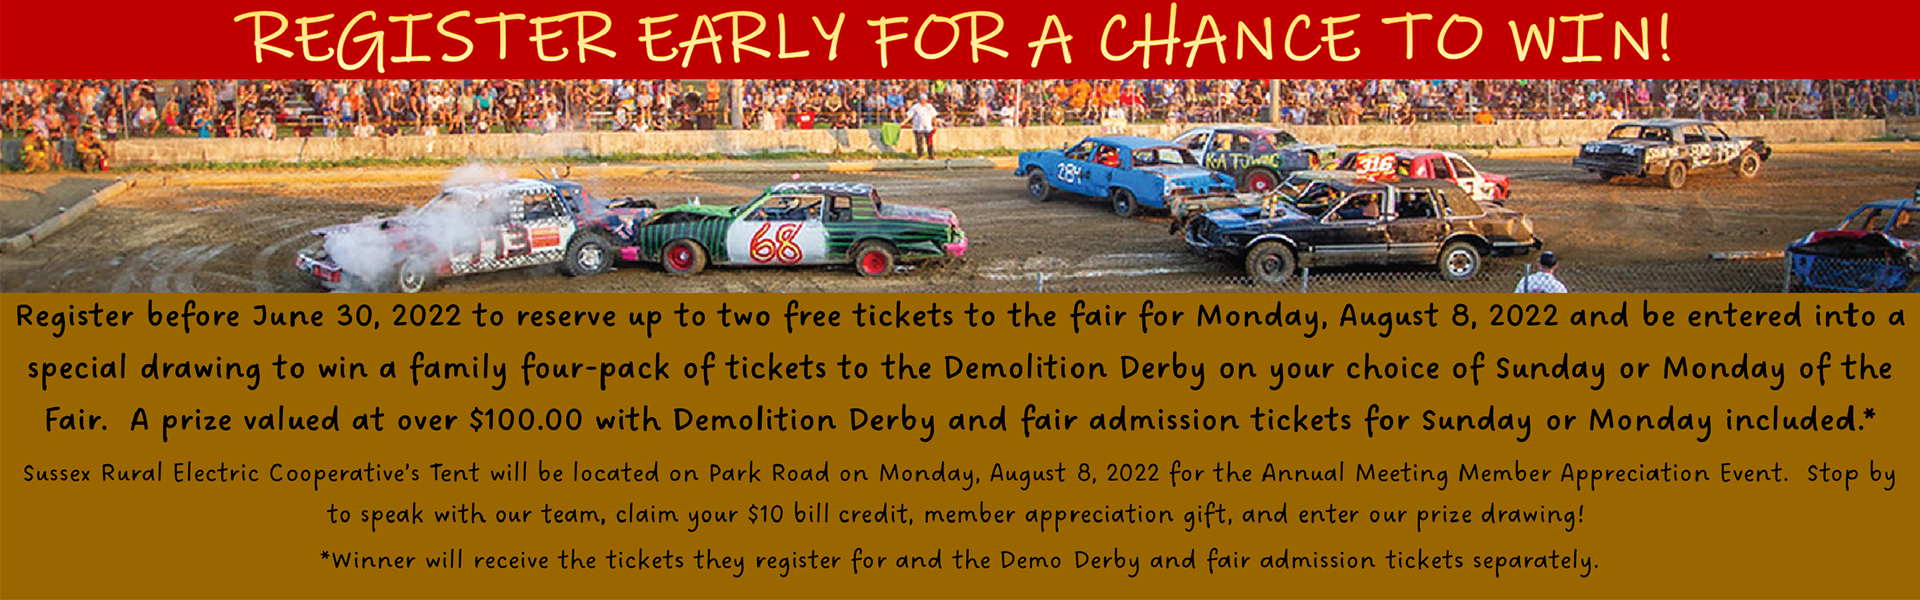 Register early for a chance to win! Register before June 30, 2022 to reserve up to two free tickets to the fair for Monday, August 8, 2022 and be entered into a special drawing to win a family four-pack of tickets tot he Demolition Derby of your choice of Sunday or Monday of the Fair. A prize valued at over $100.00 with Demolition Derby and Fair admission tickets for Sunday or Monday included.